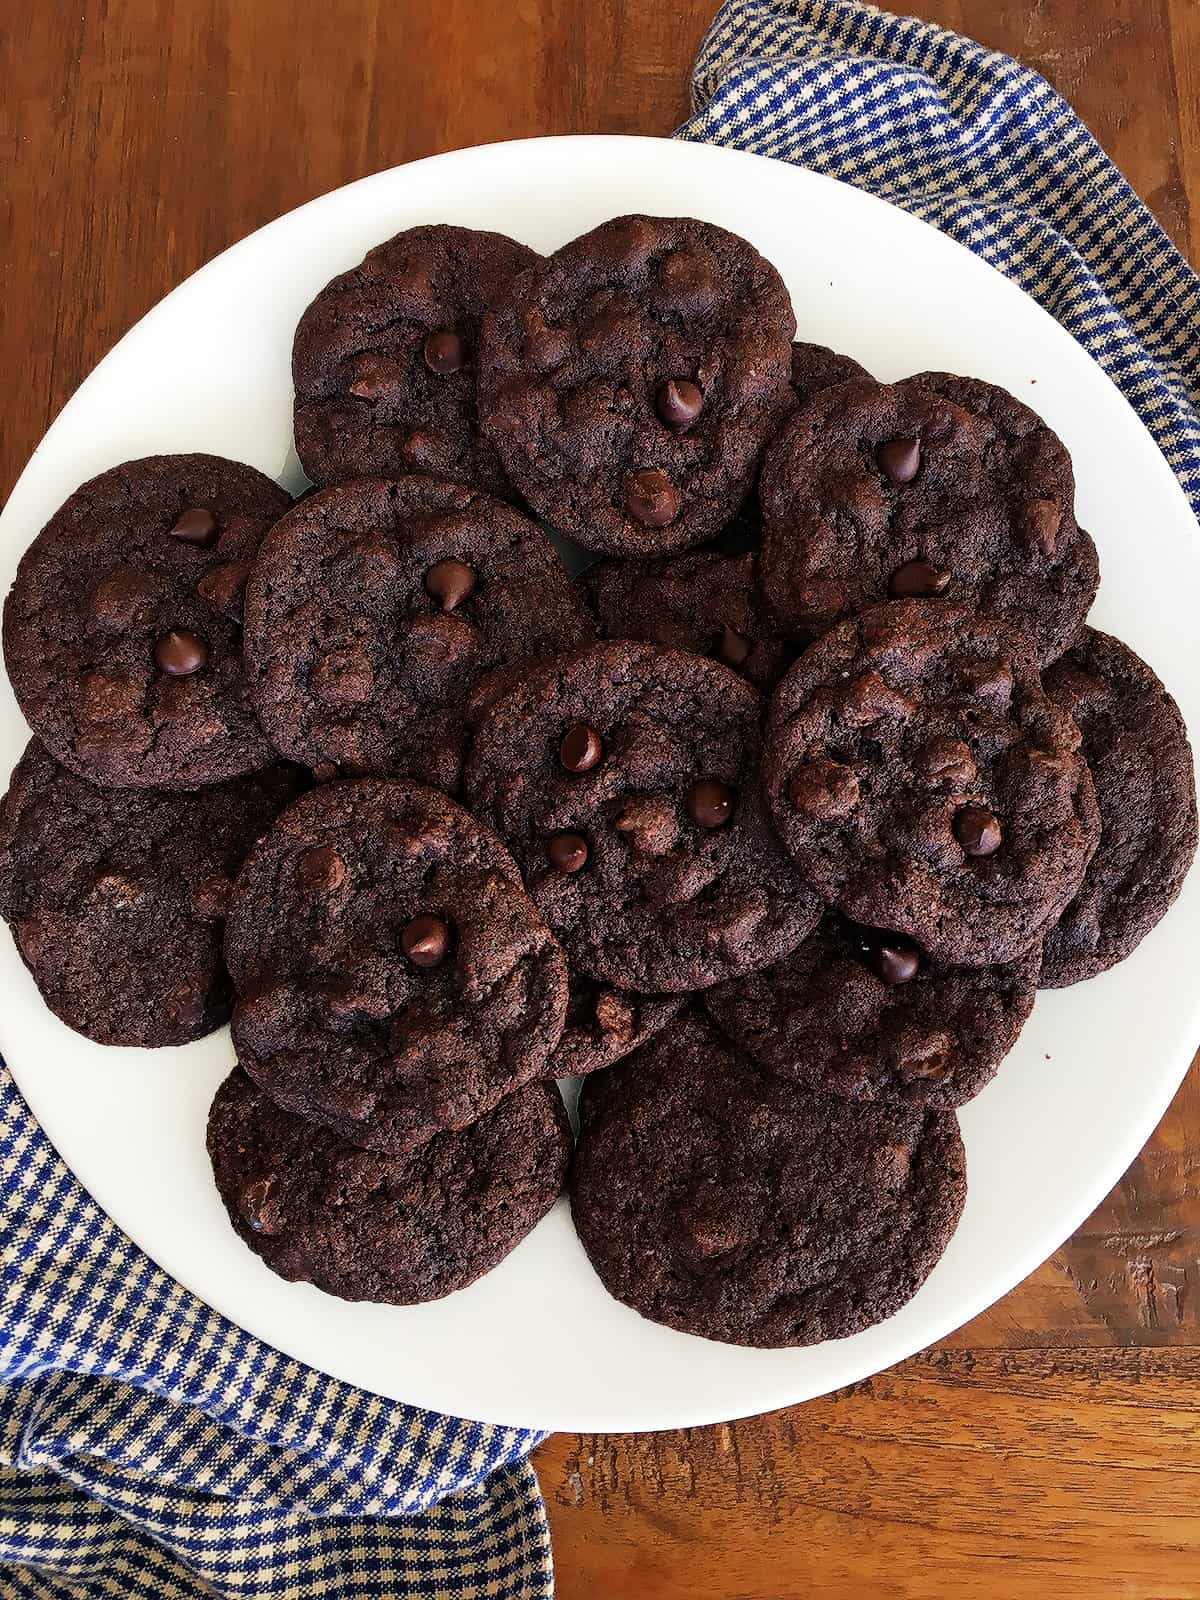 Freshly baked soft and chewy double chocolate chip cookies on a white serving plate atop a wood table.